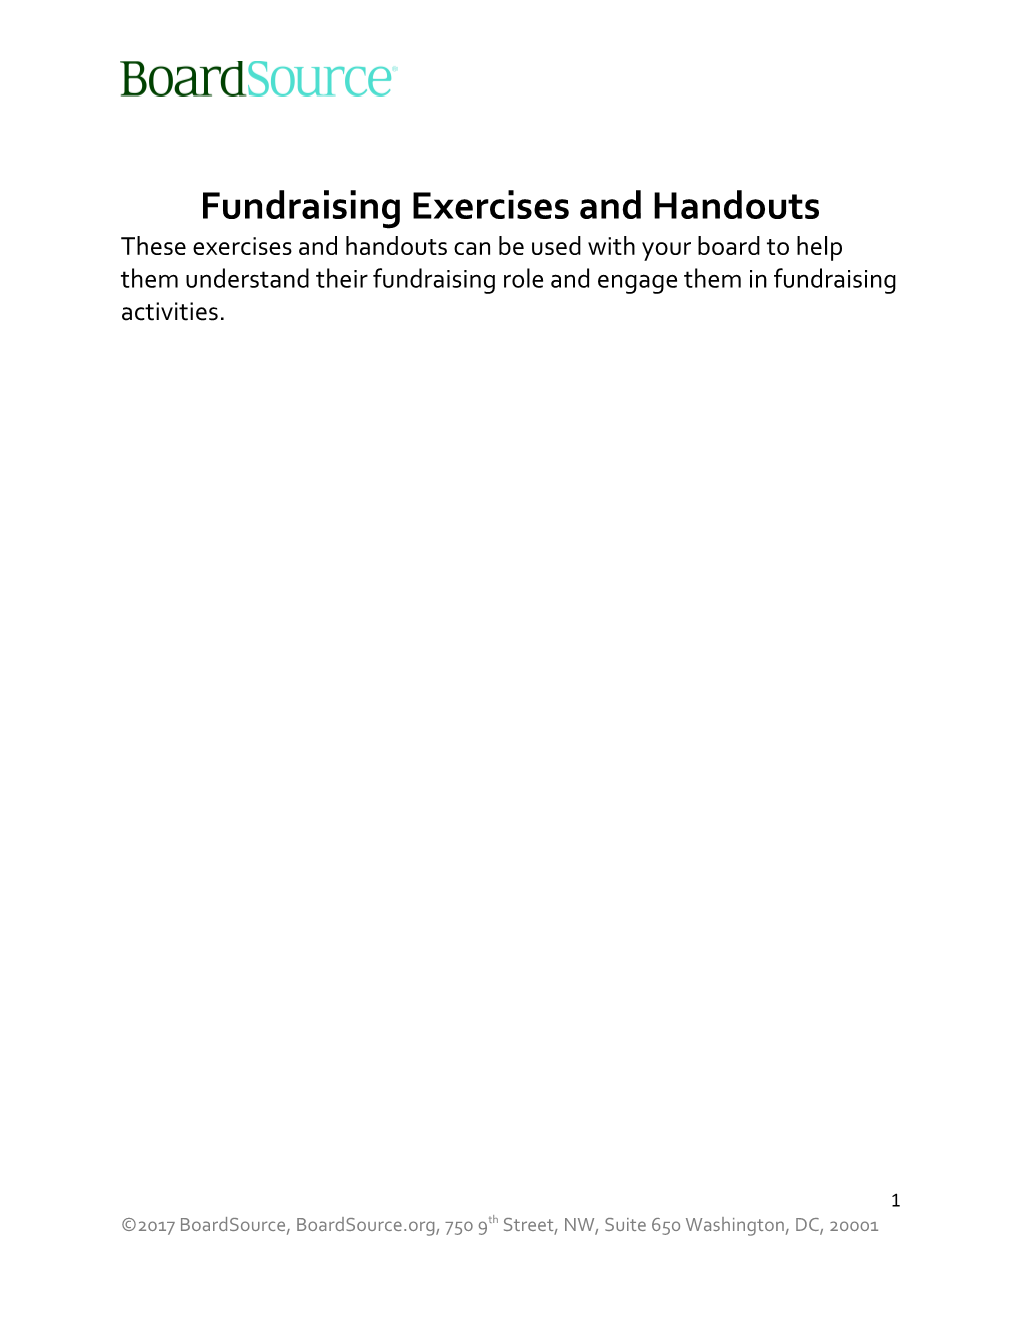 Fundraising Exercises and Handouts